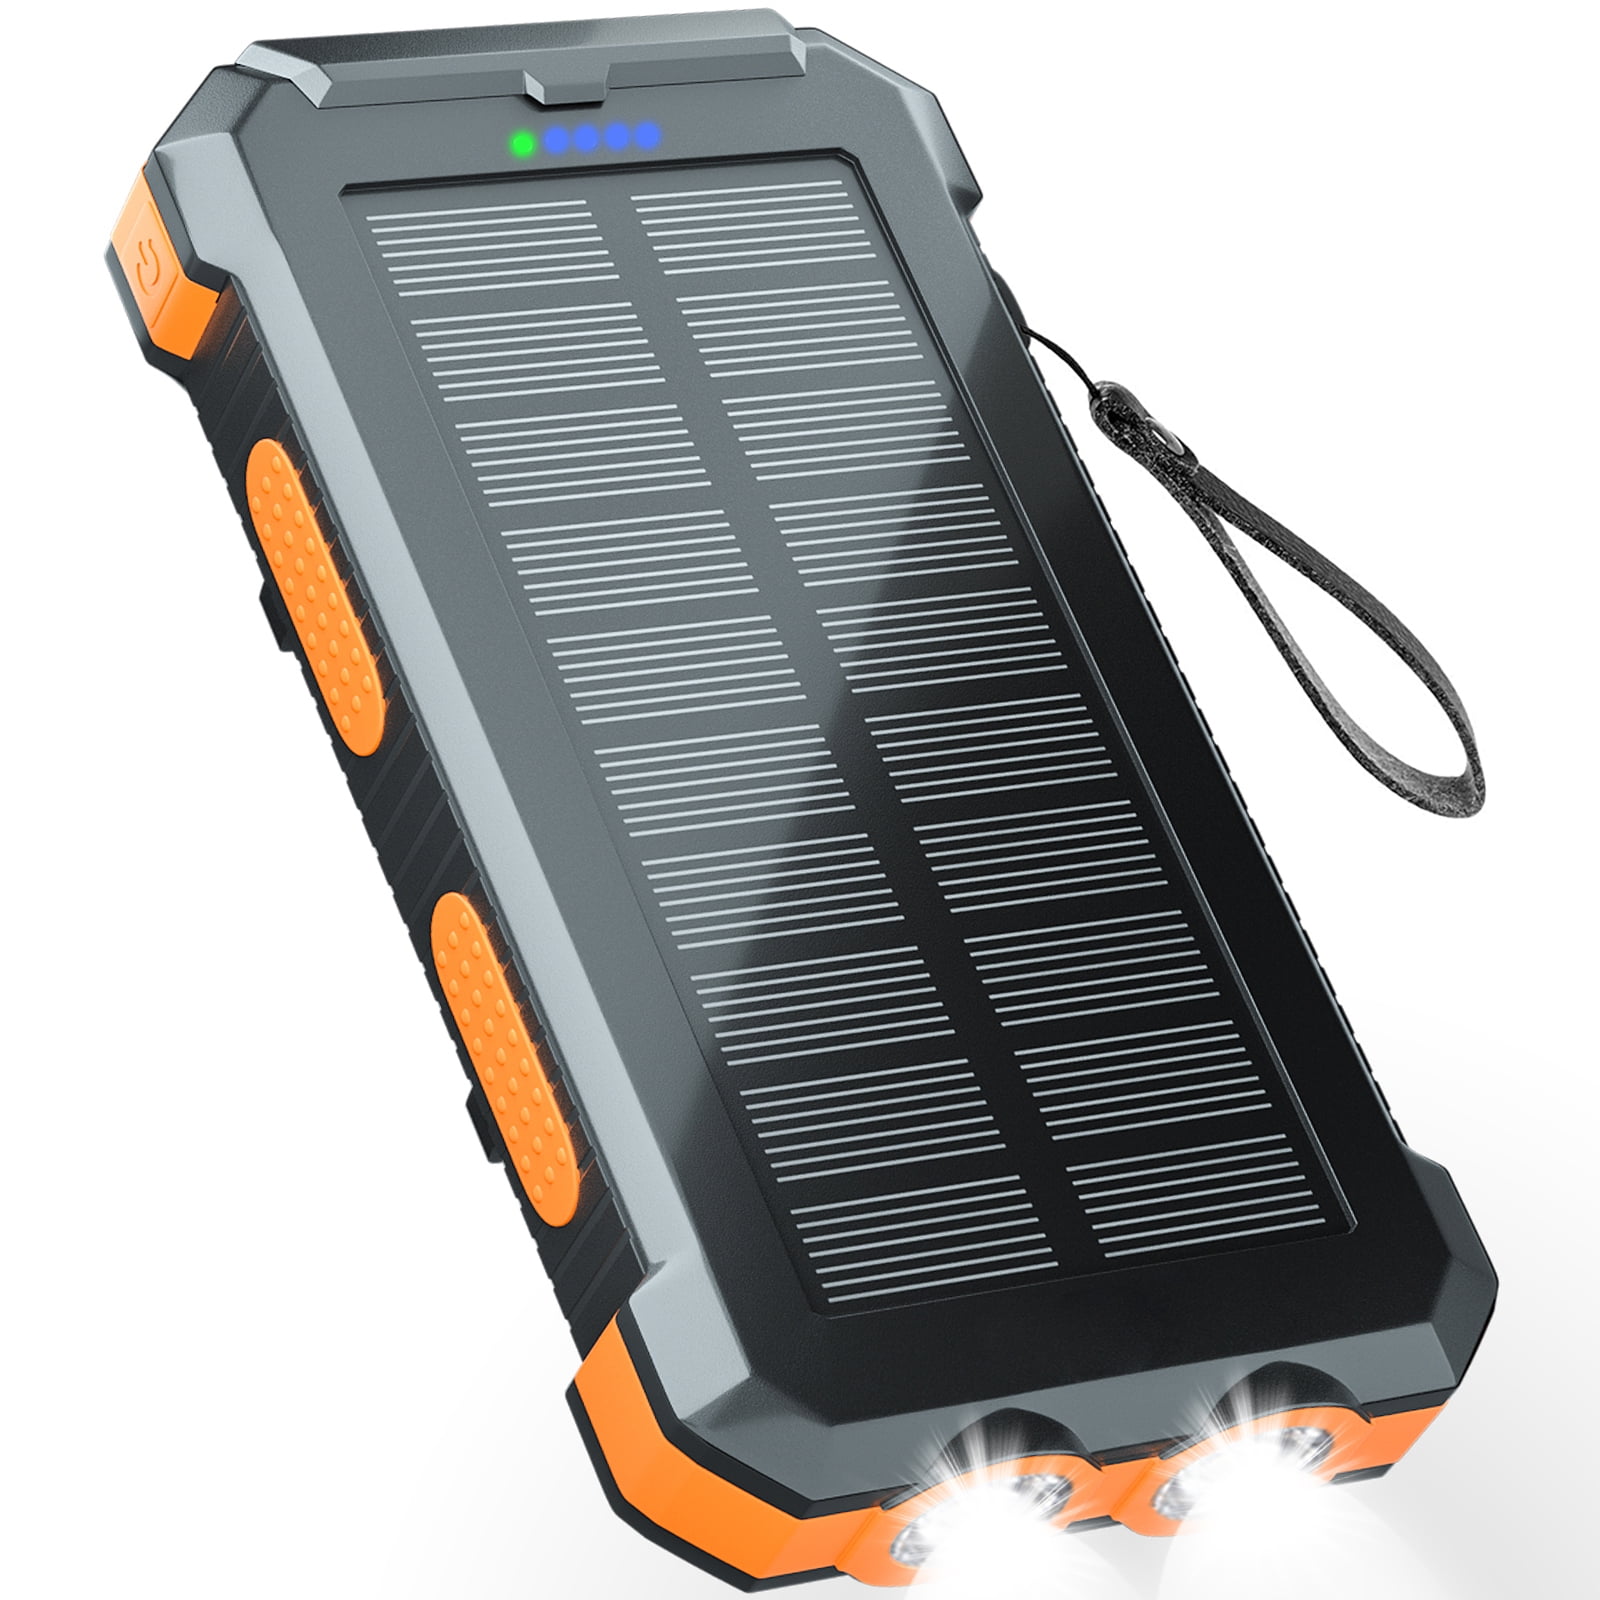 Durecopow 30000mAh Solar Charger Cell iPhone, Portable Solar Power Bank with Dual 5V USB Ports, 2 Led Light Flashlight, Compass Battery Pack for Outdoor Camping Hiking (Orange) - Walmart.com